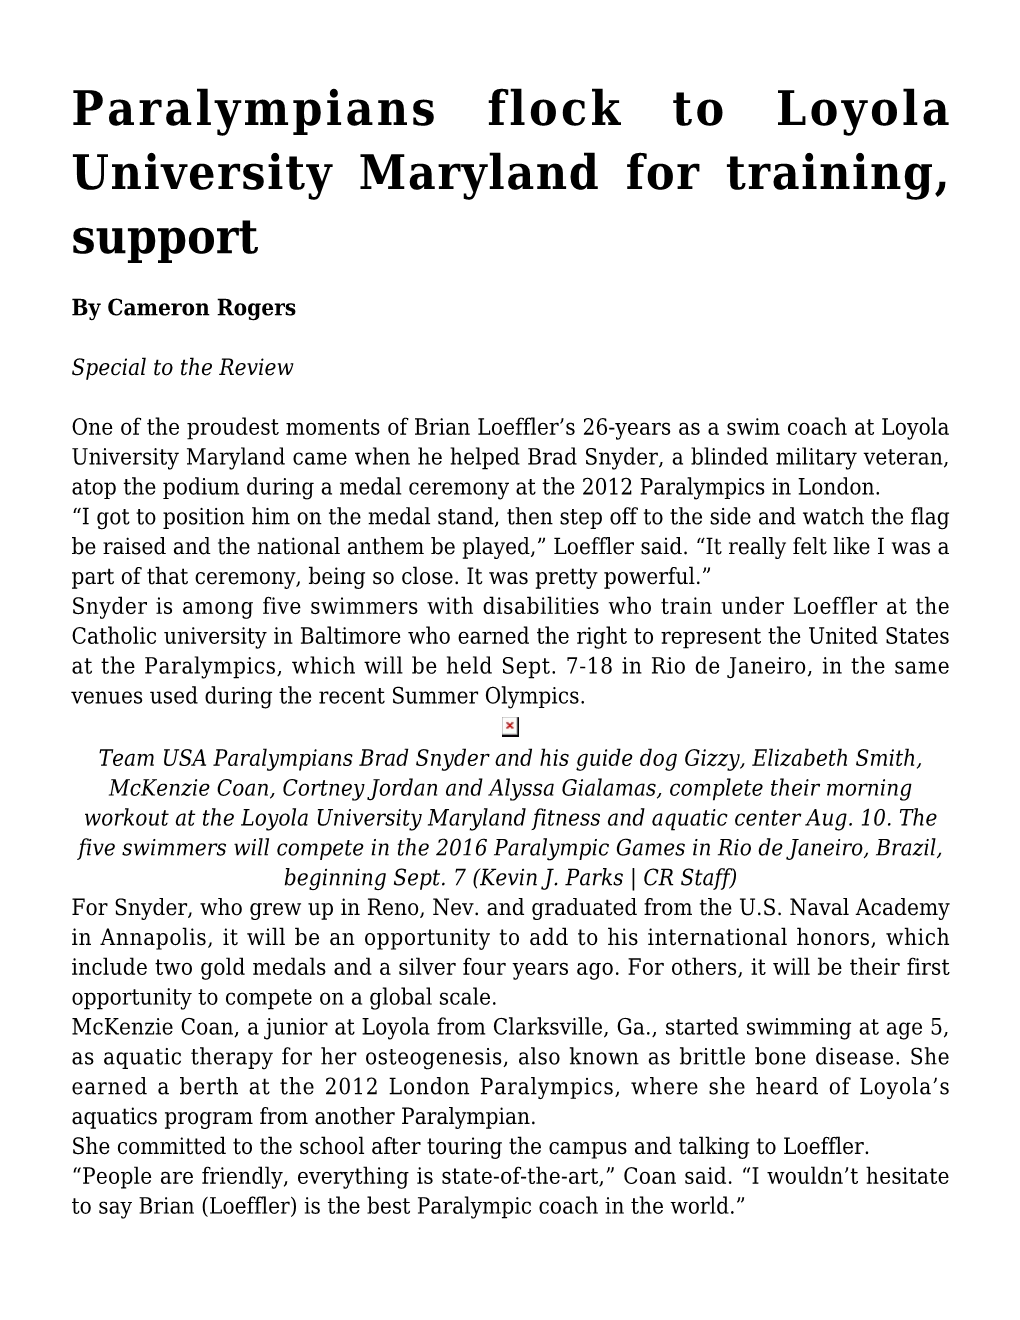 Paralympians Flock to Loyola University Maryland for Training, Support